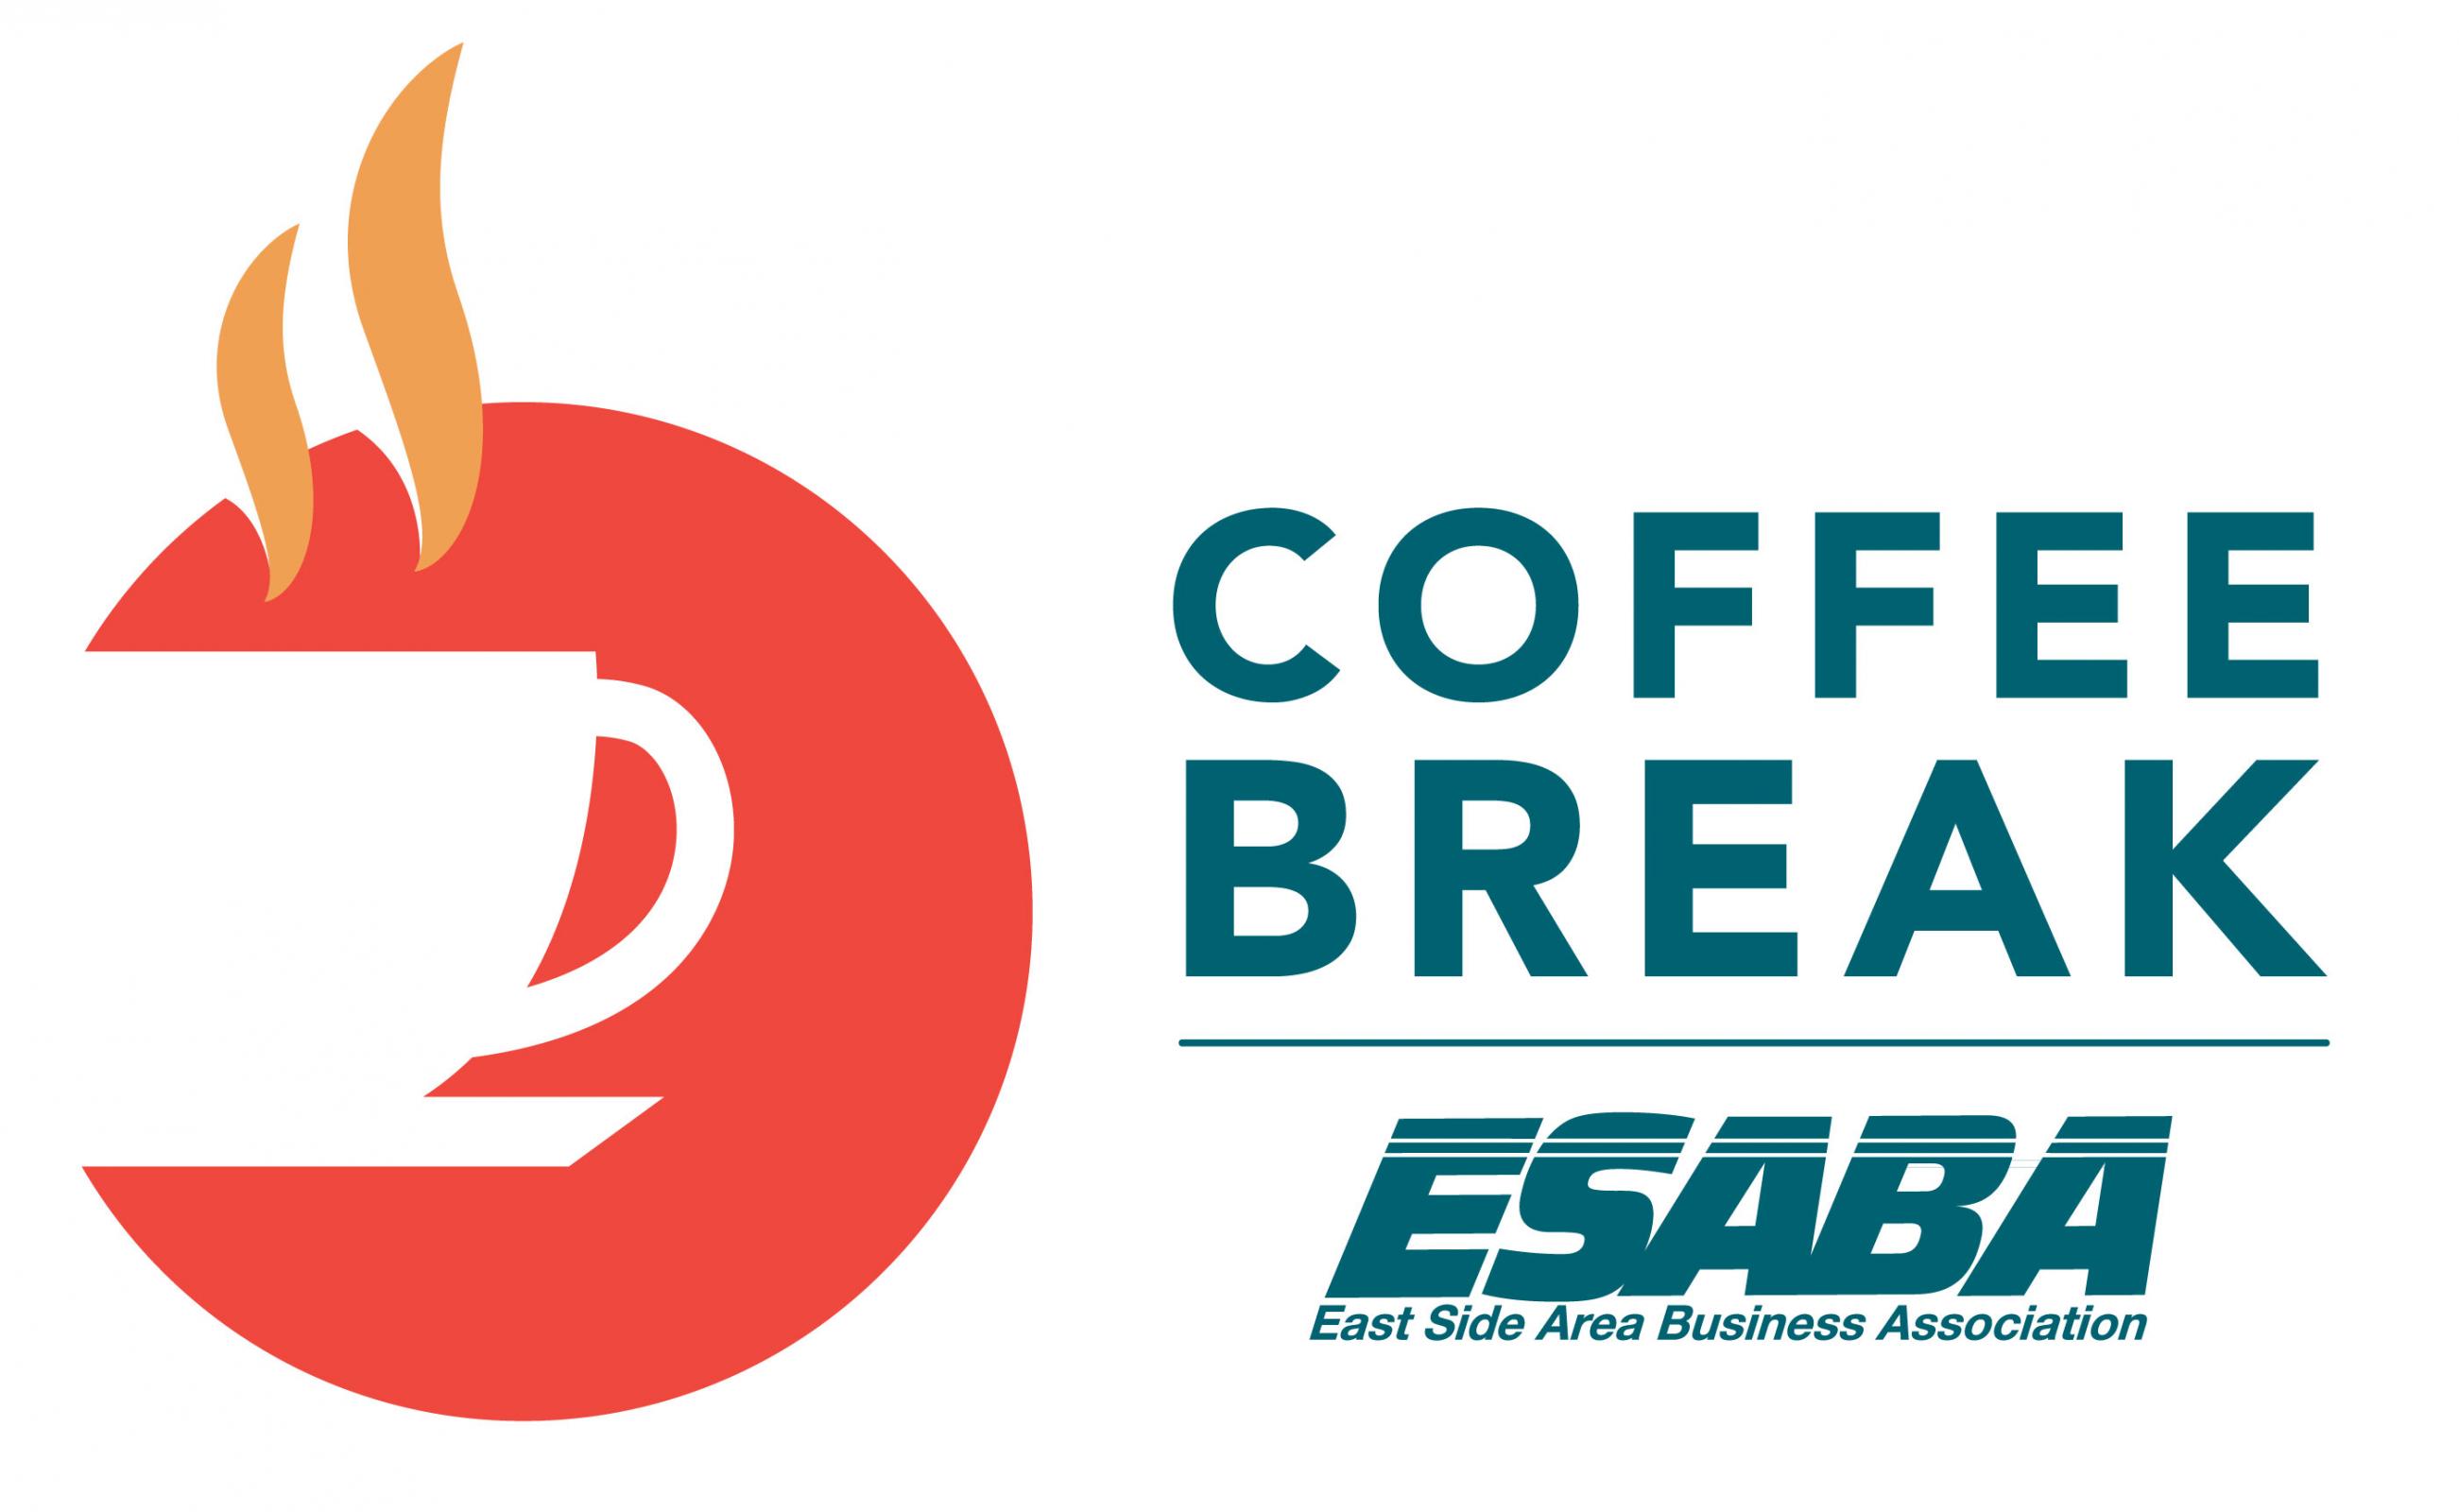 Event Promo Photo For East Side Coffee Break! - IDEAL Printers